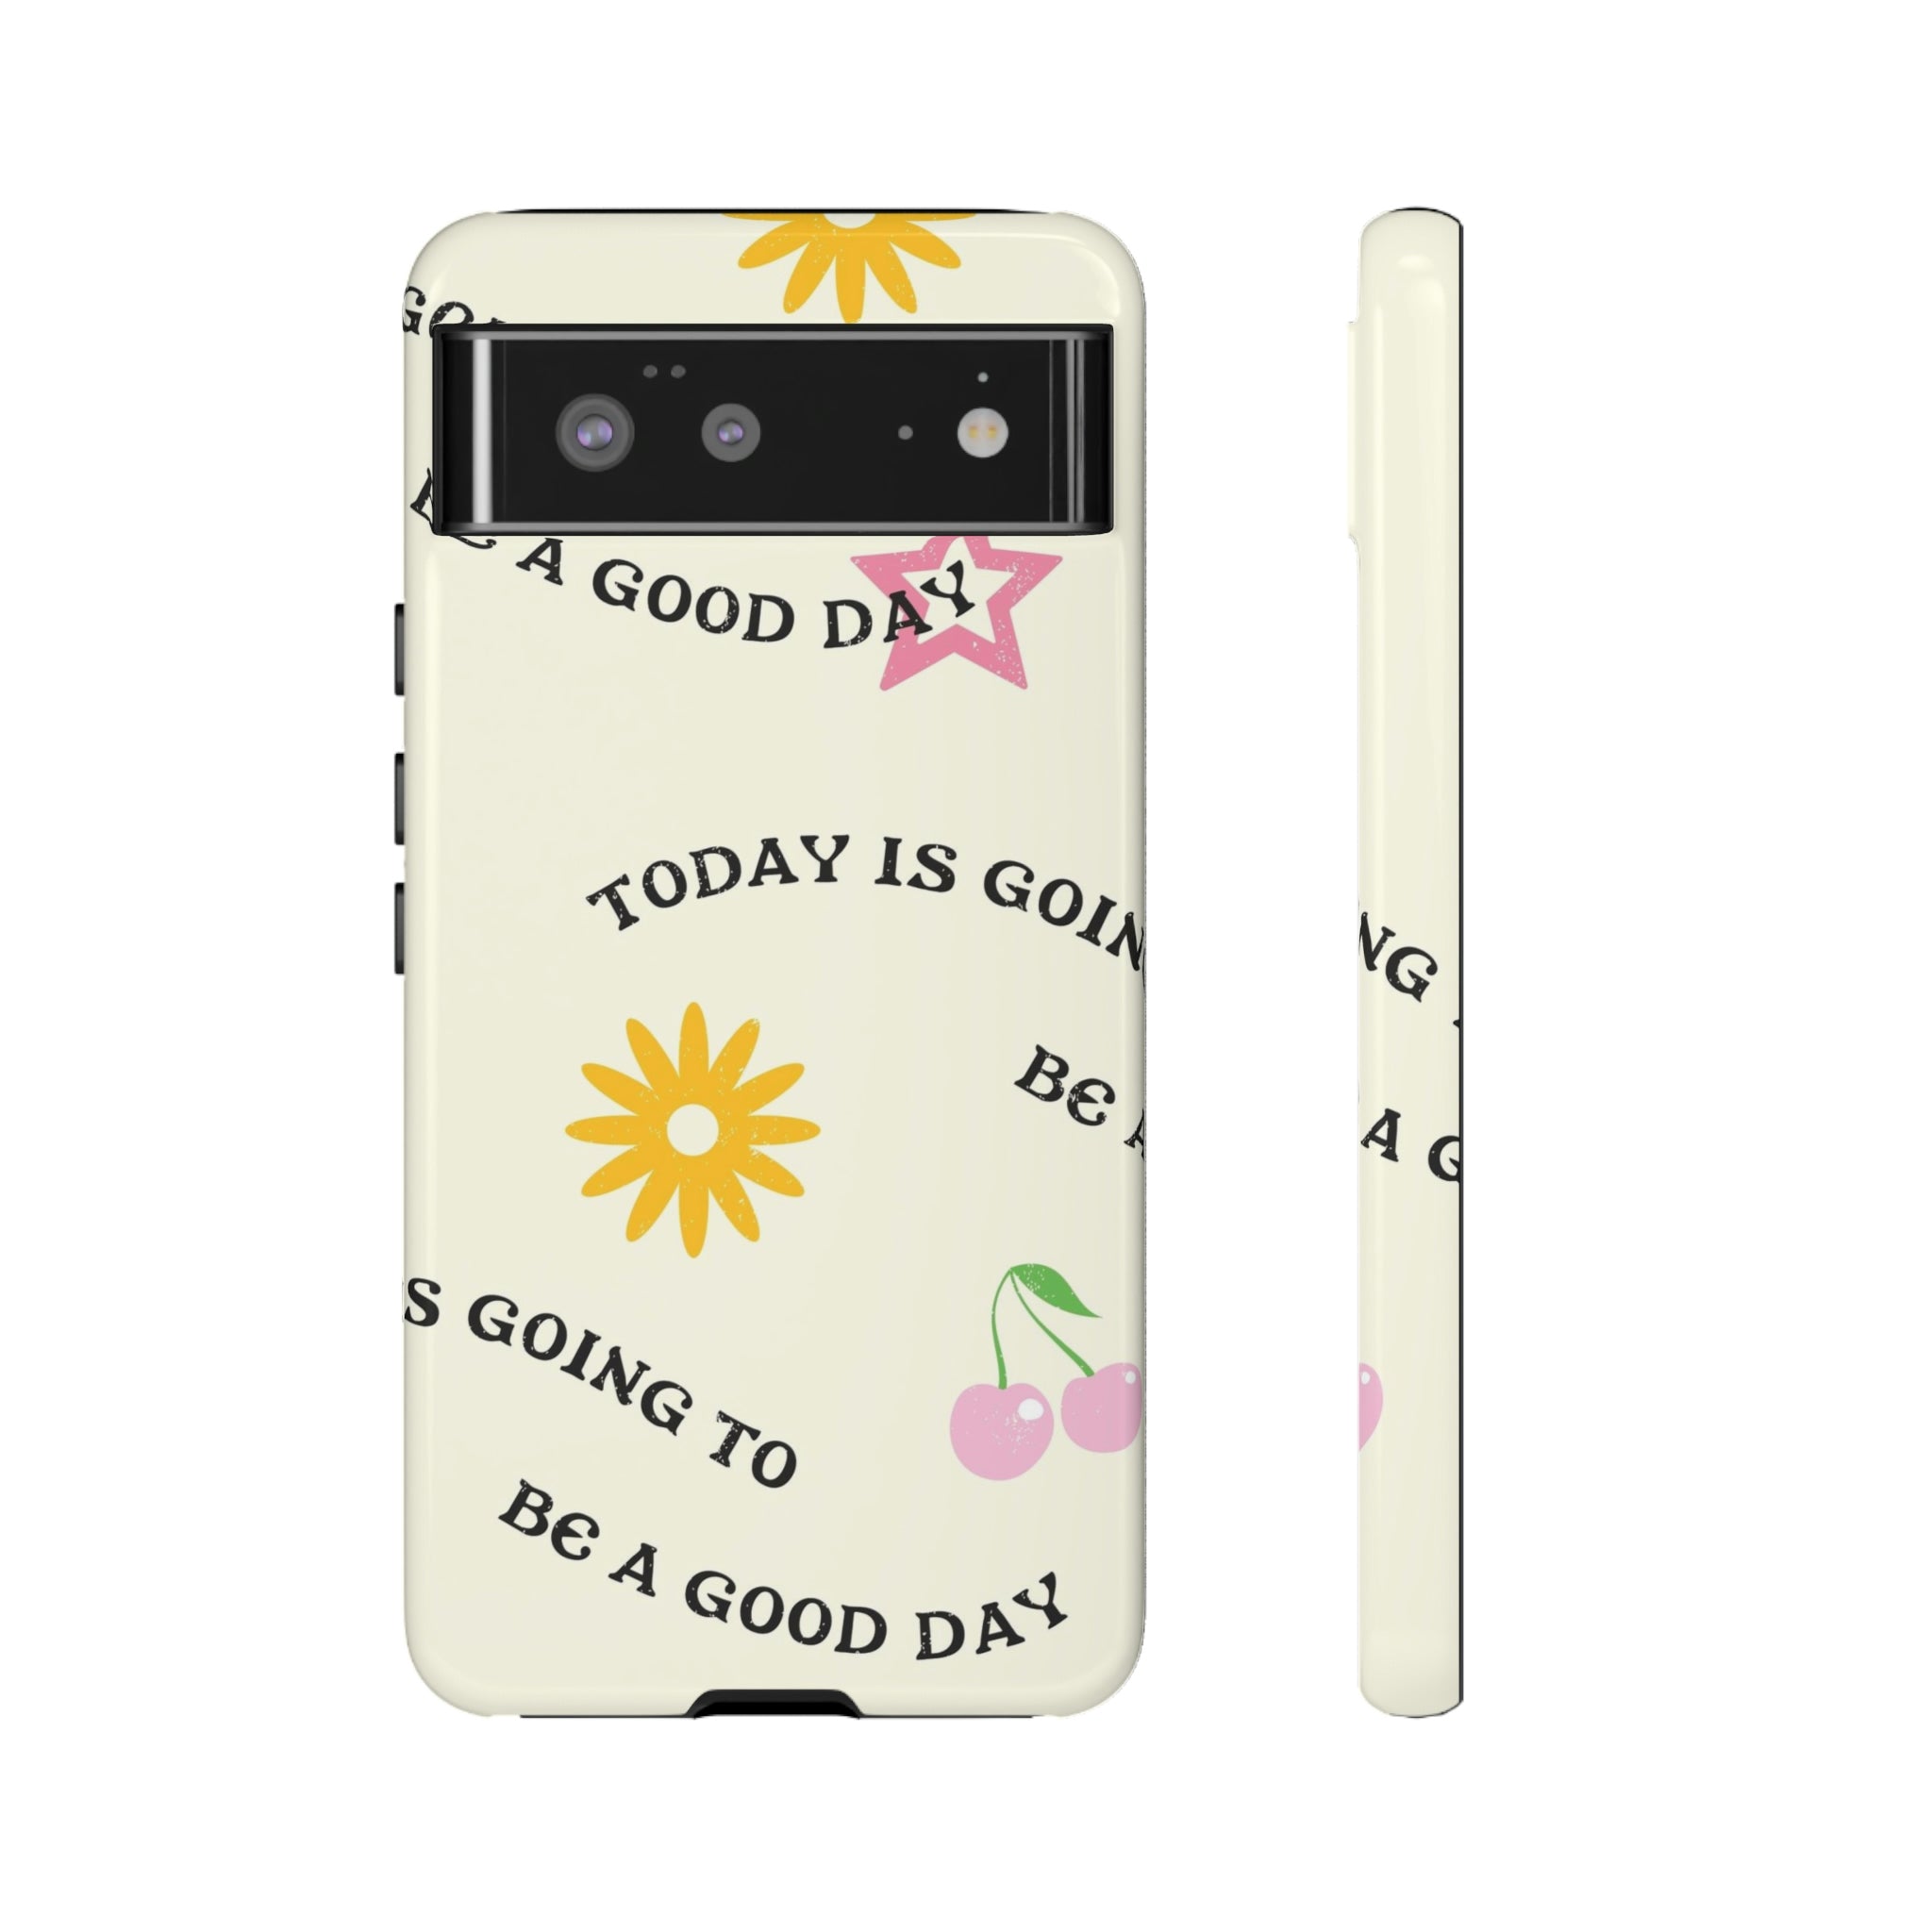 Today is Going To Be a Good Day Phone Case - Time's Reel